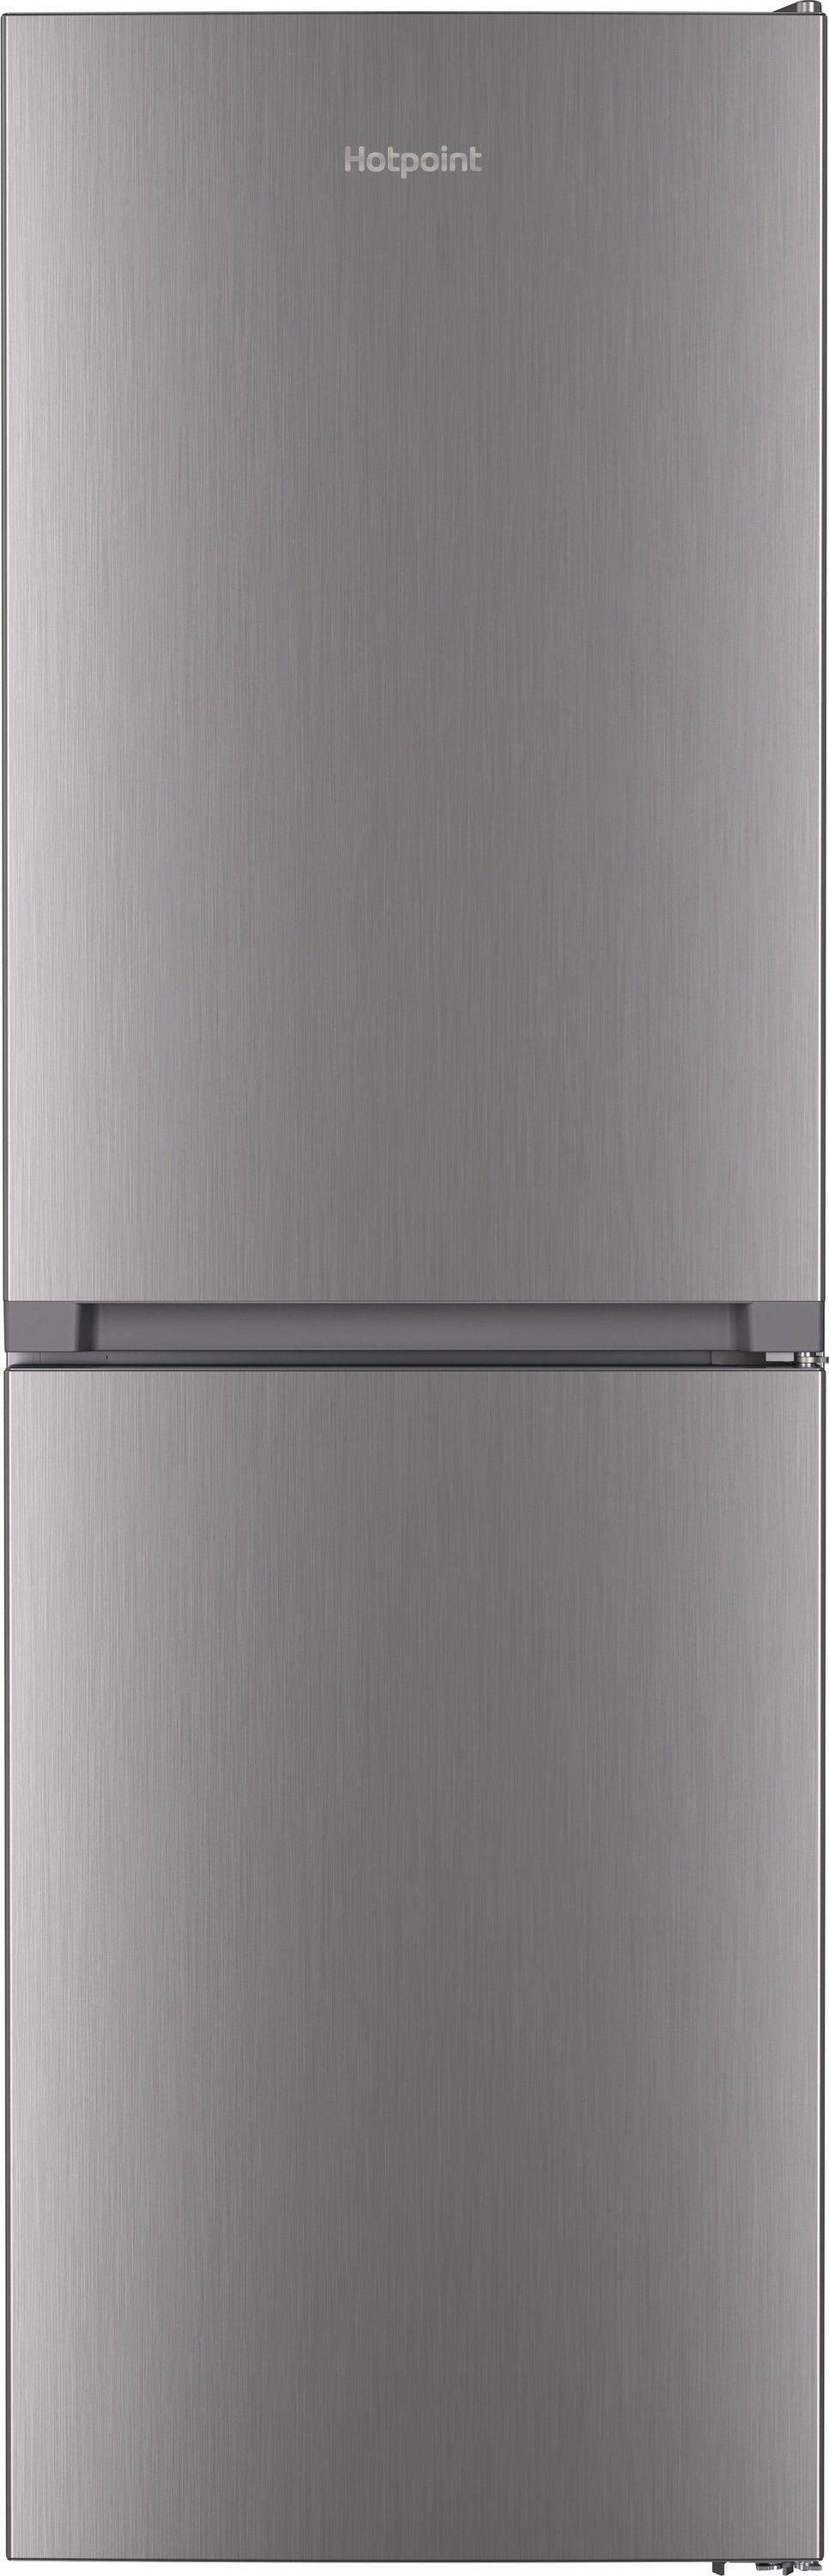 Hotpoint HBTNF 60182 X UK 50/50 No Frost Fridge Freezer - Stainless Steel - E Rated, Stainless Steel